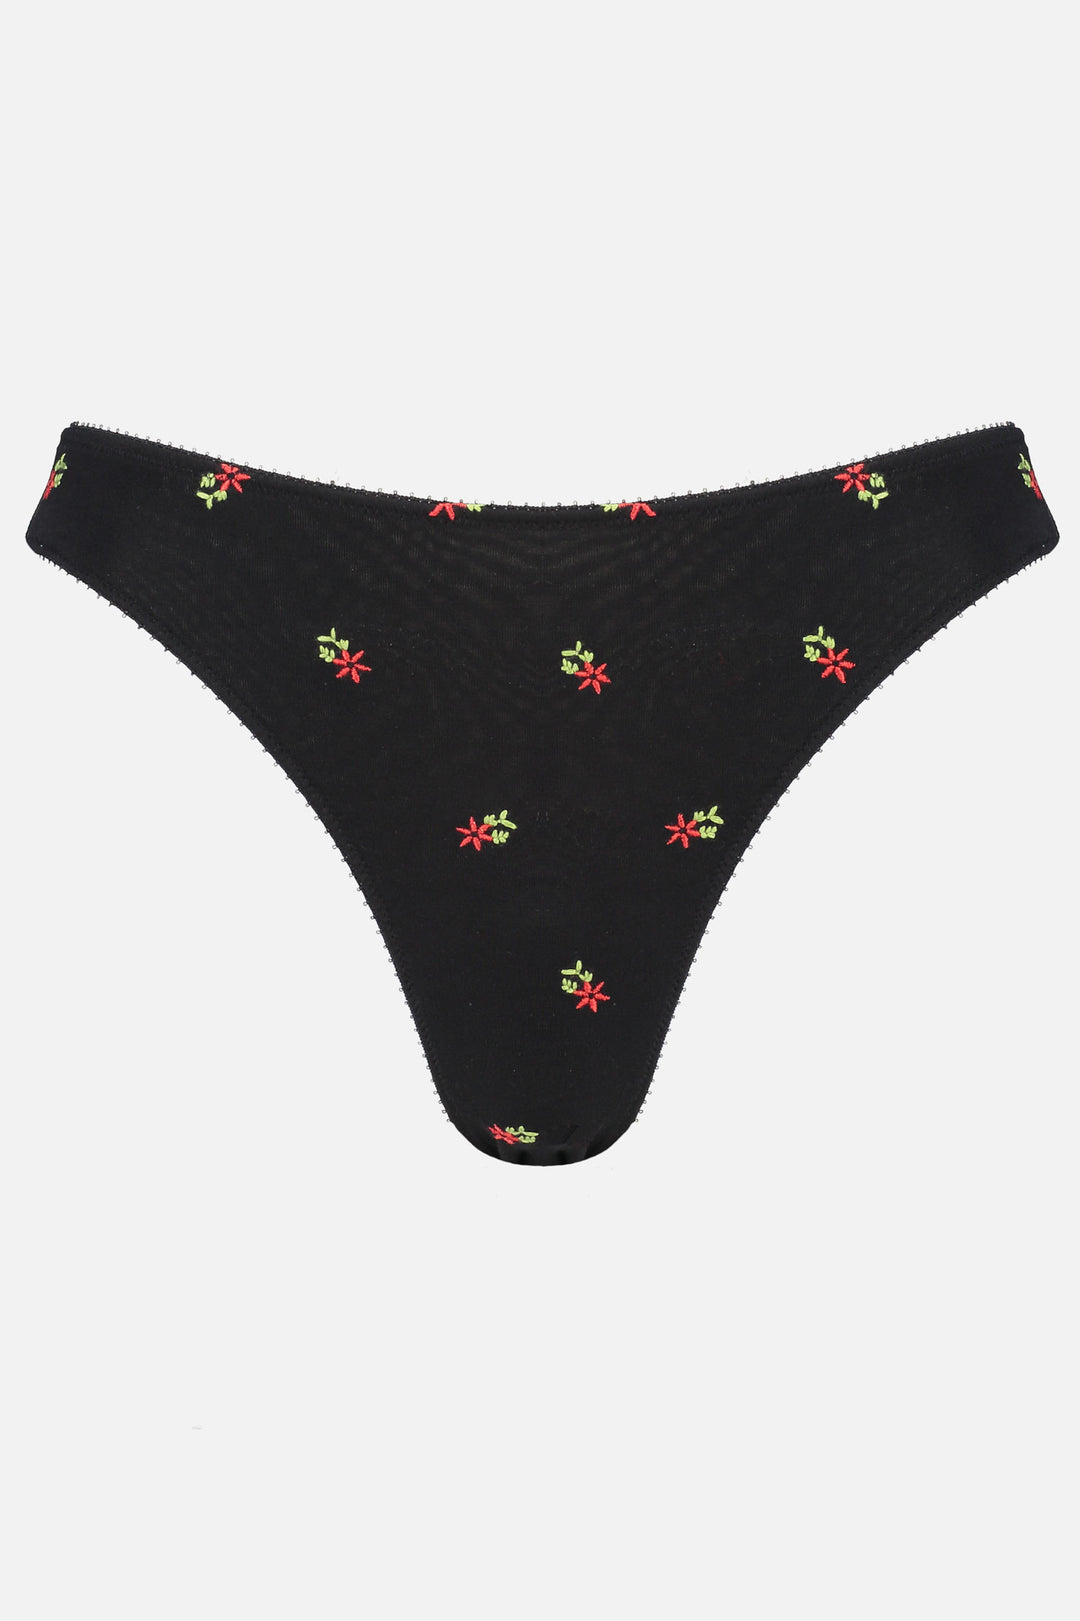 Videris Lingerie bikini knicker in black embroidered TENCEL™ a mid-rise style cut to follow the natural curve of your hips